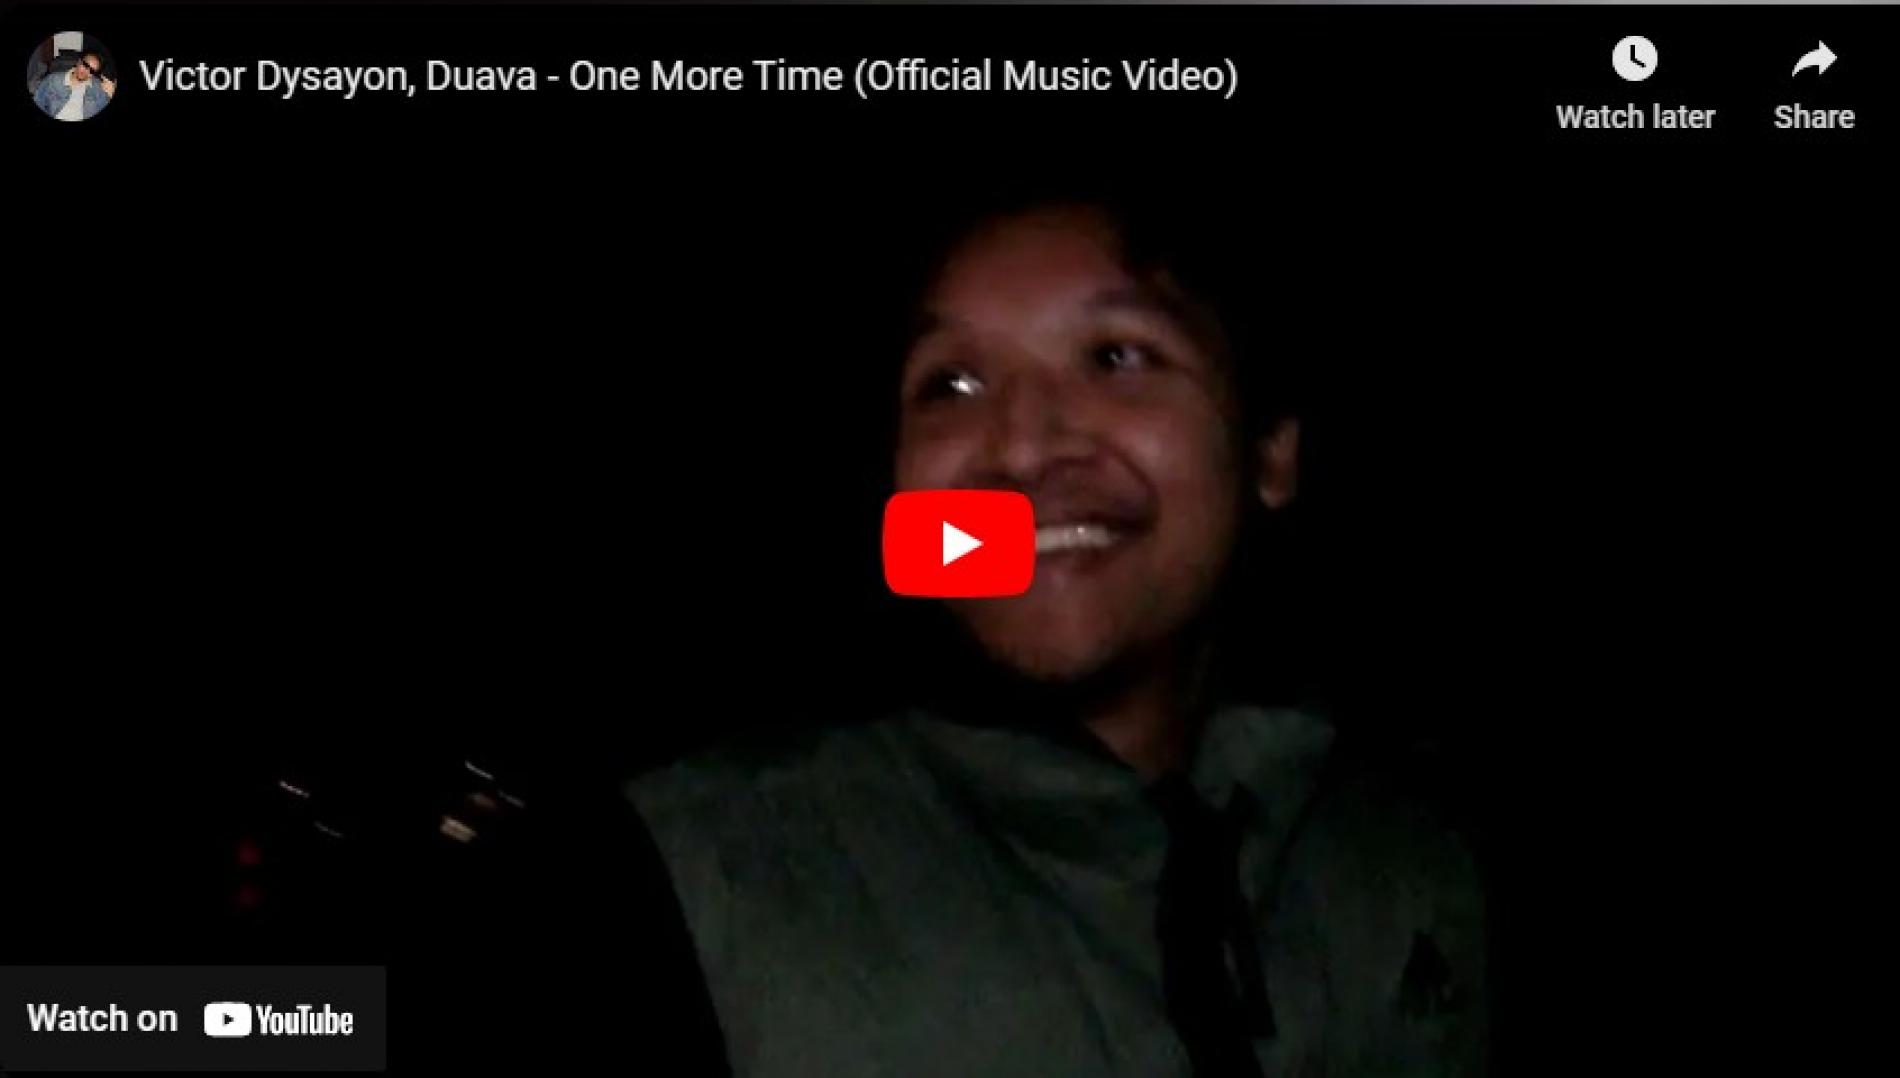 New Music : Victor Dysayon, Duava – One More Time (Official Music Video)